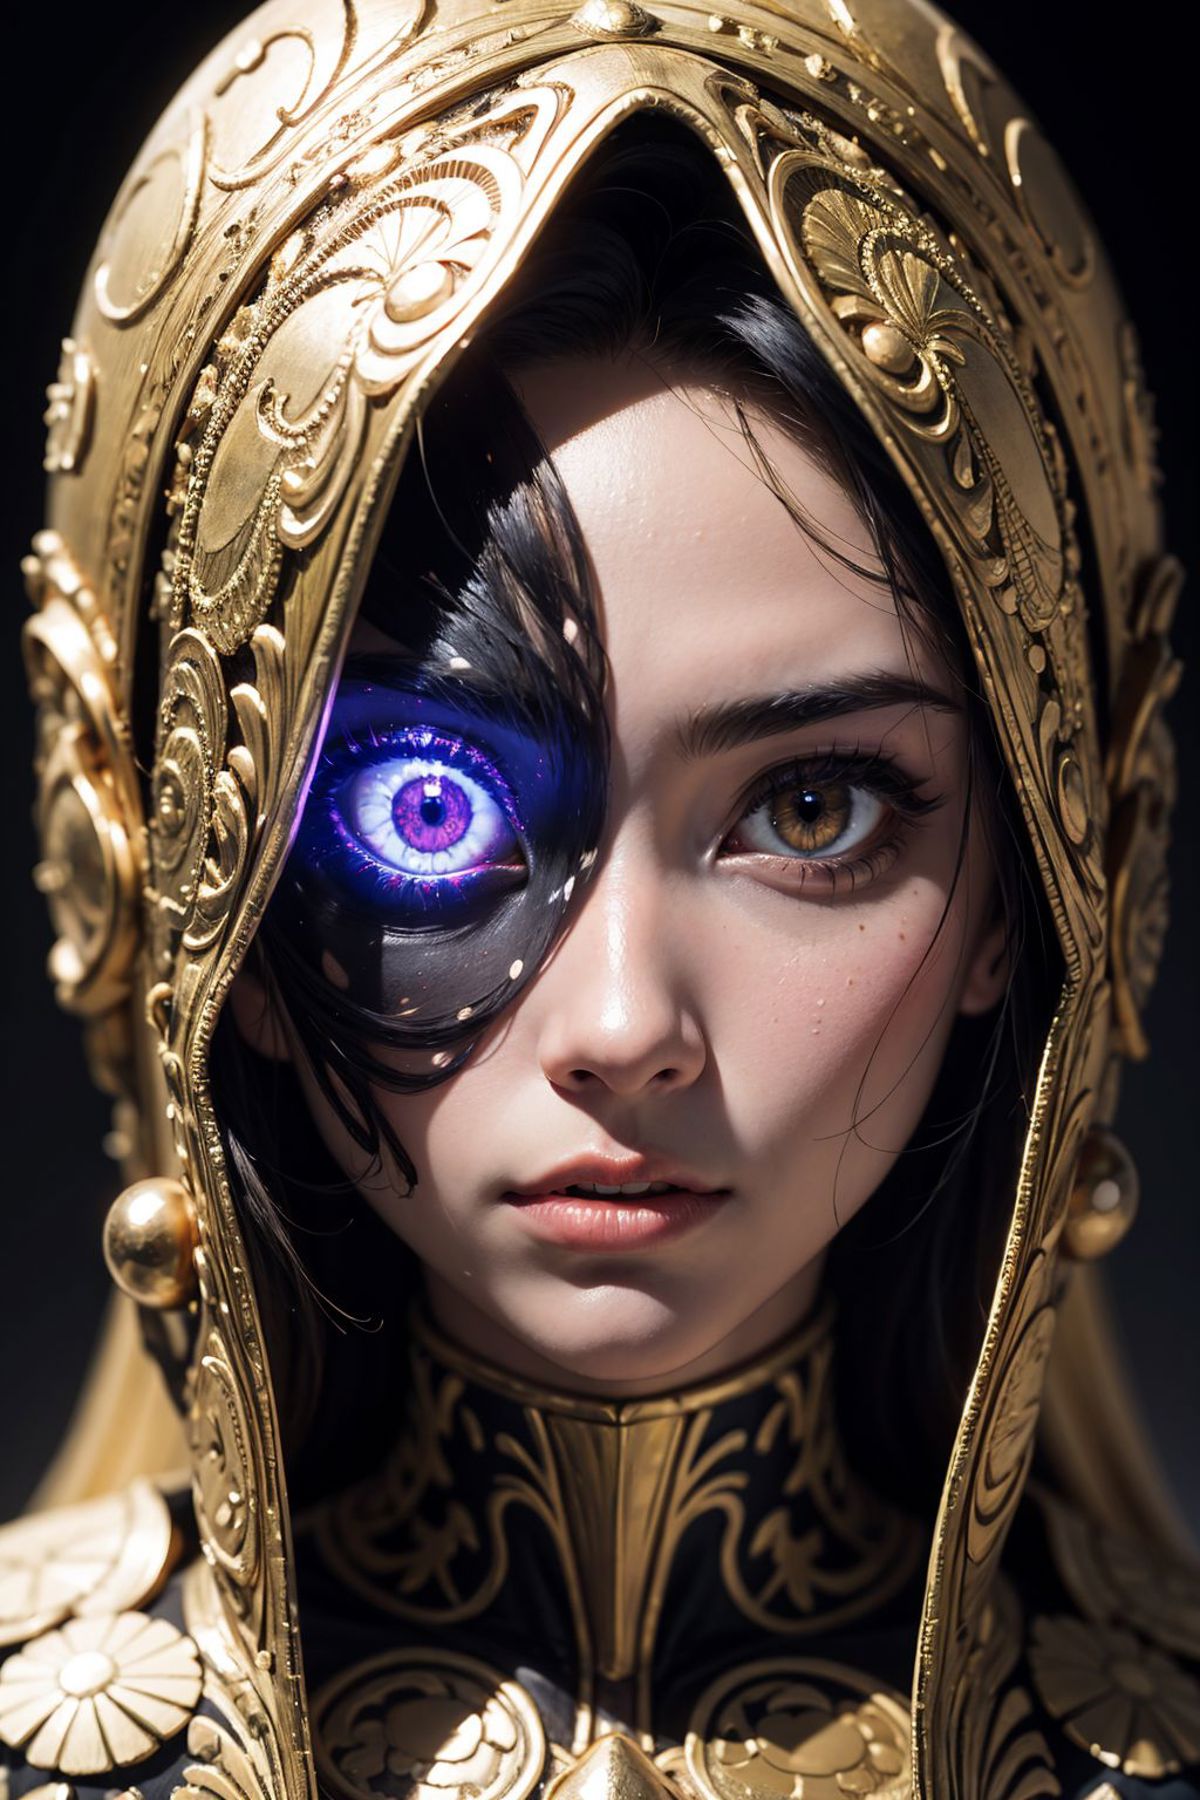 The image features a woman wearing a gold headpiece, which appears to be a mask or a headdress. She has a very distinctive appearance, with one eye painted purple and the other painted yellow. The unique color combination of her eyes makes her stand out and draws attention to her striking features.